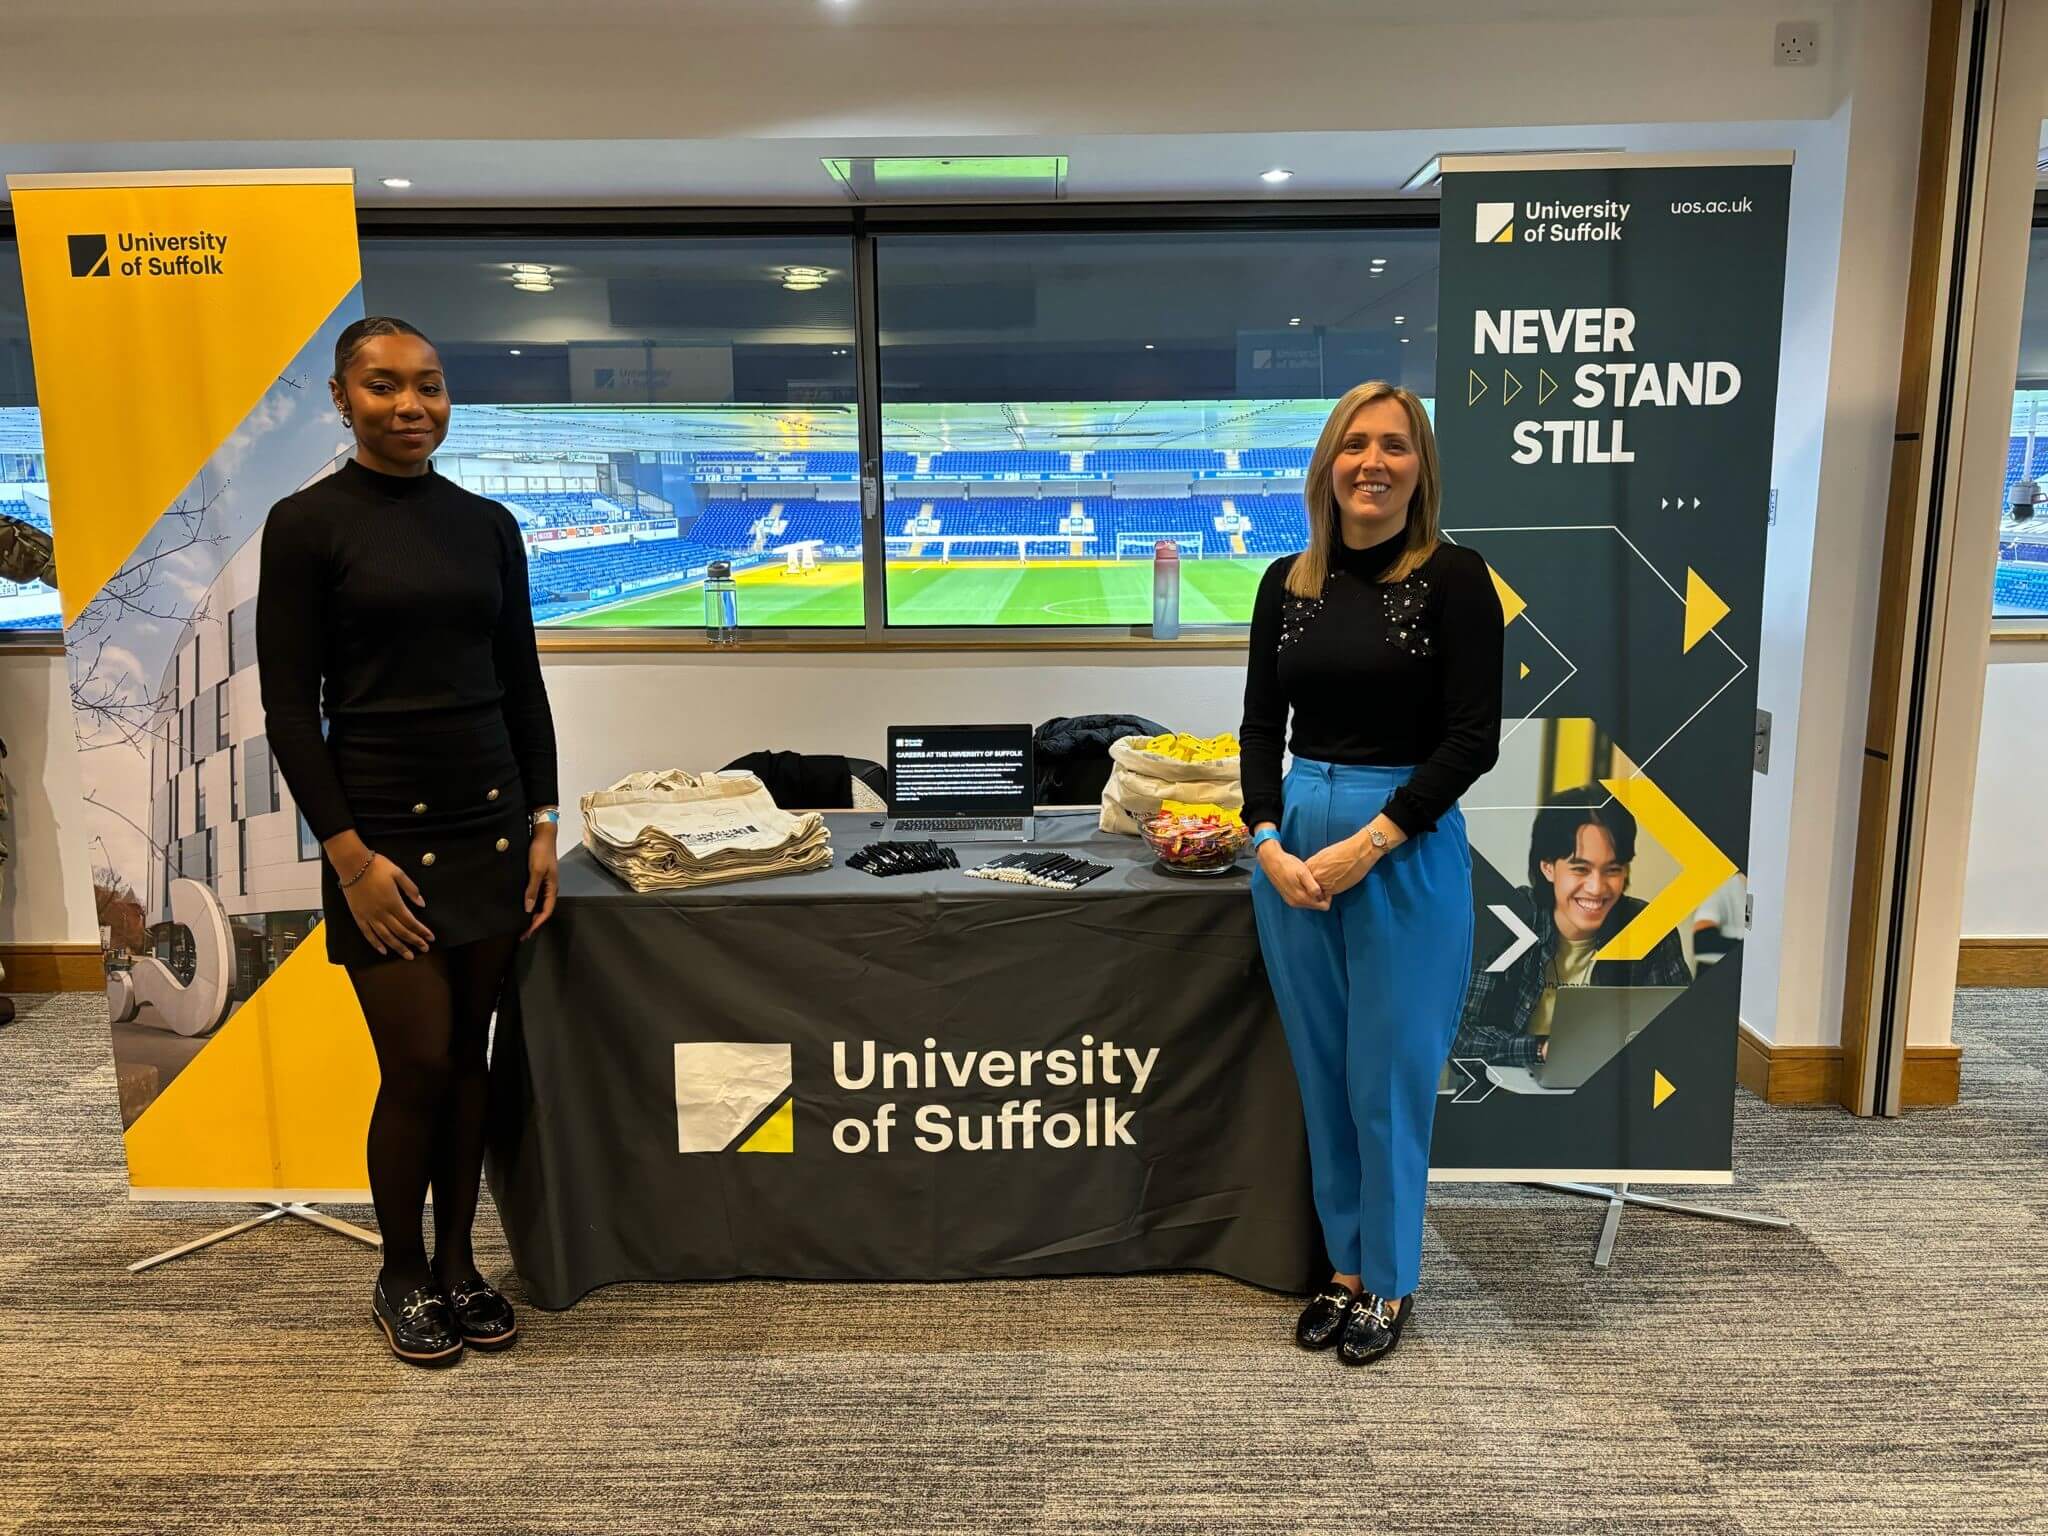 University of Suffolk at our event in Ipswich